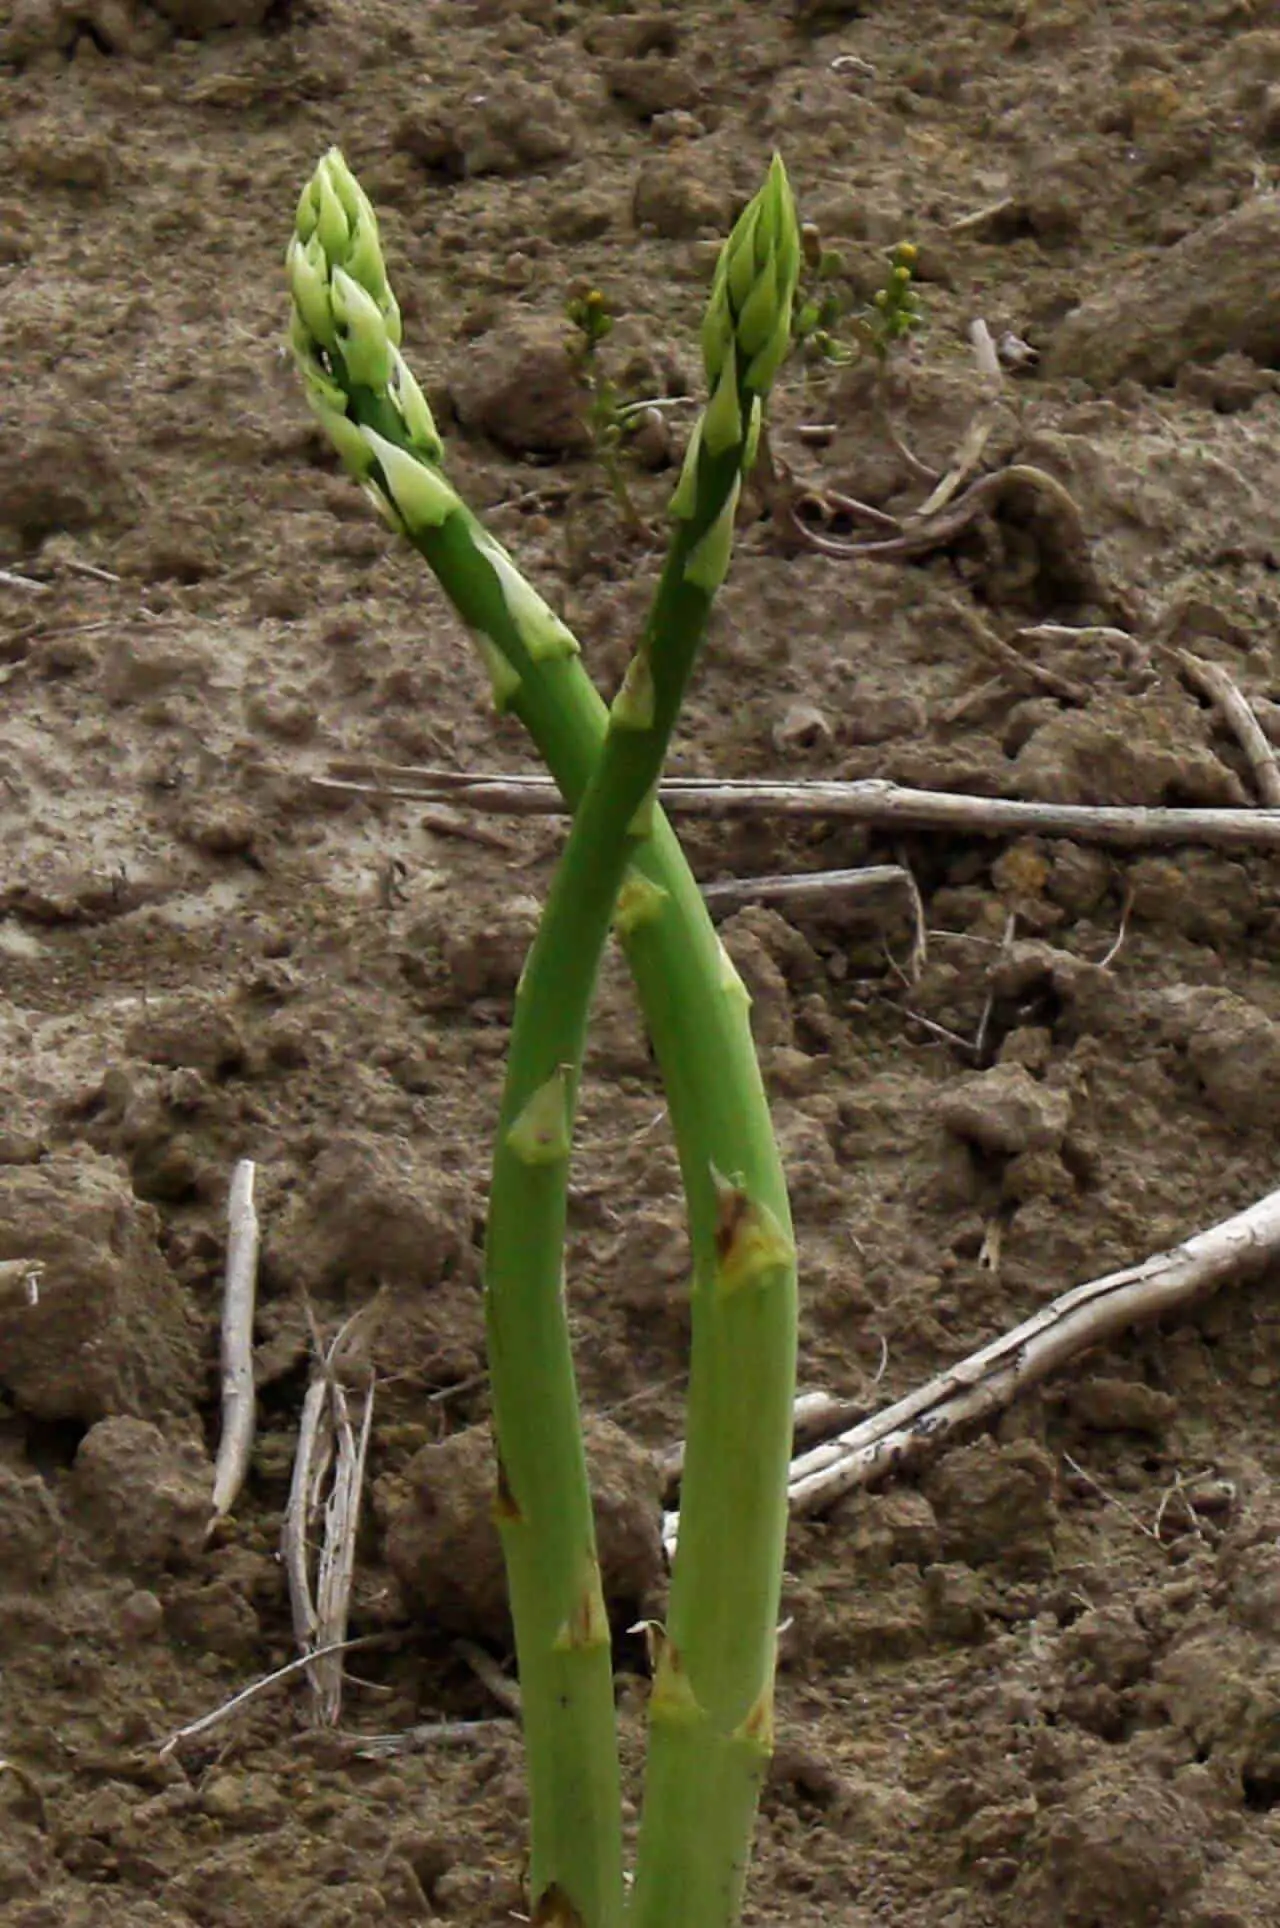 How to Grow Asparagus from its Stalk